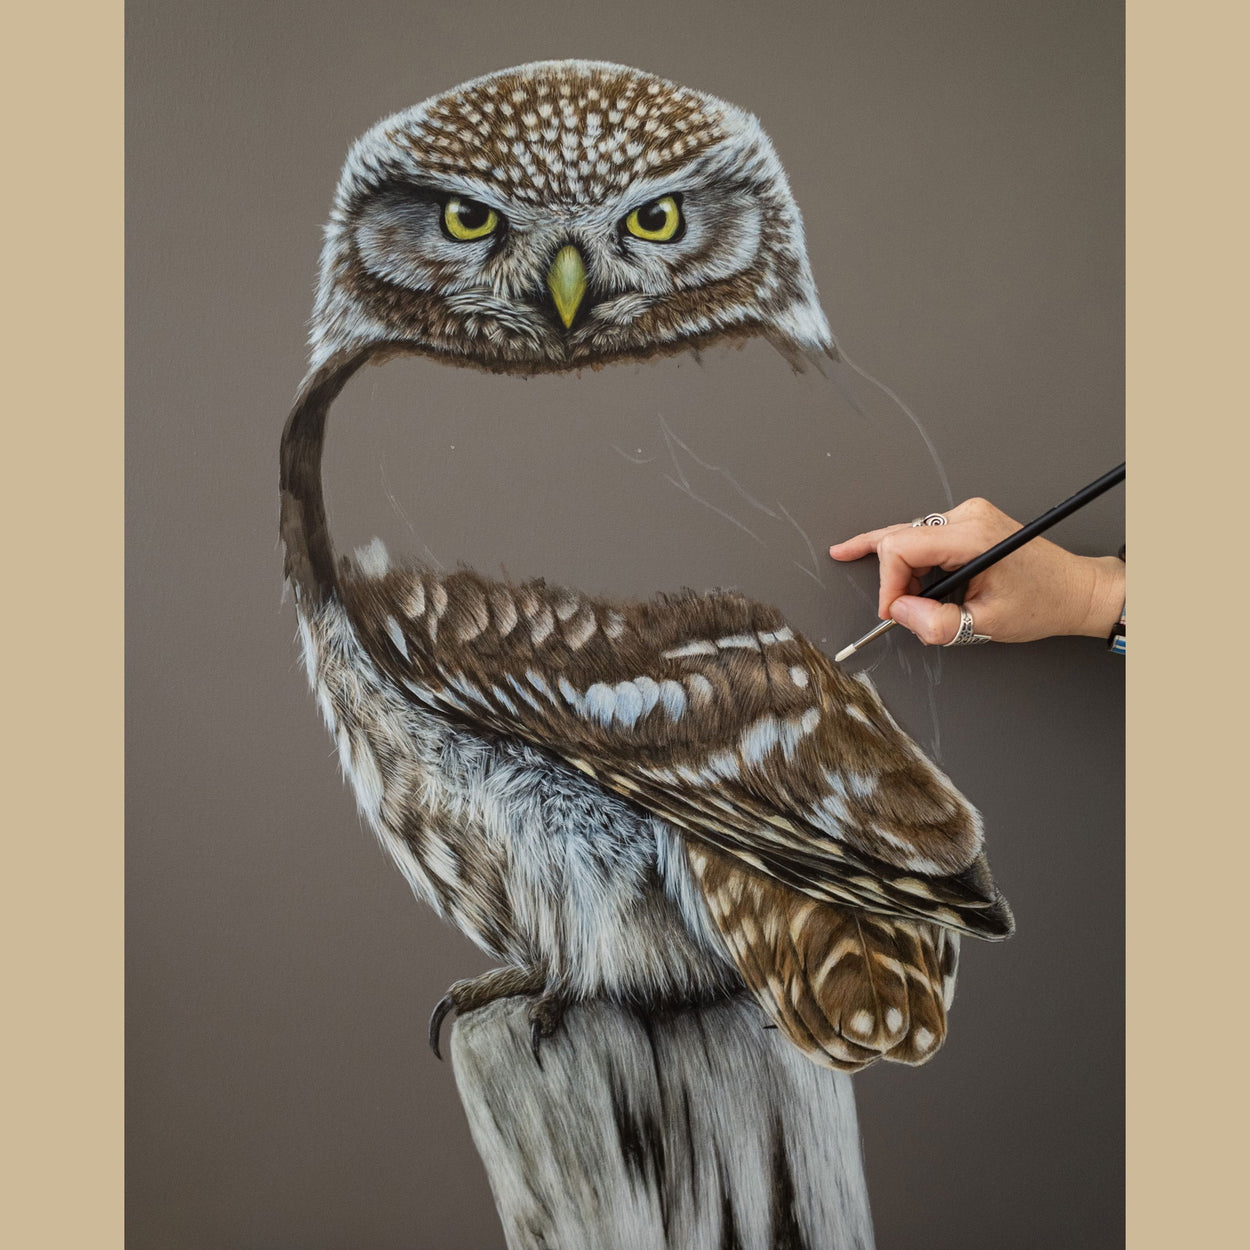 Hand holding a paintbrush over a part-completed painting of a little owl sat on a post